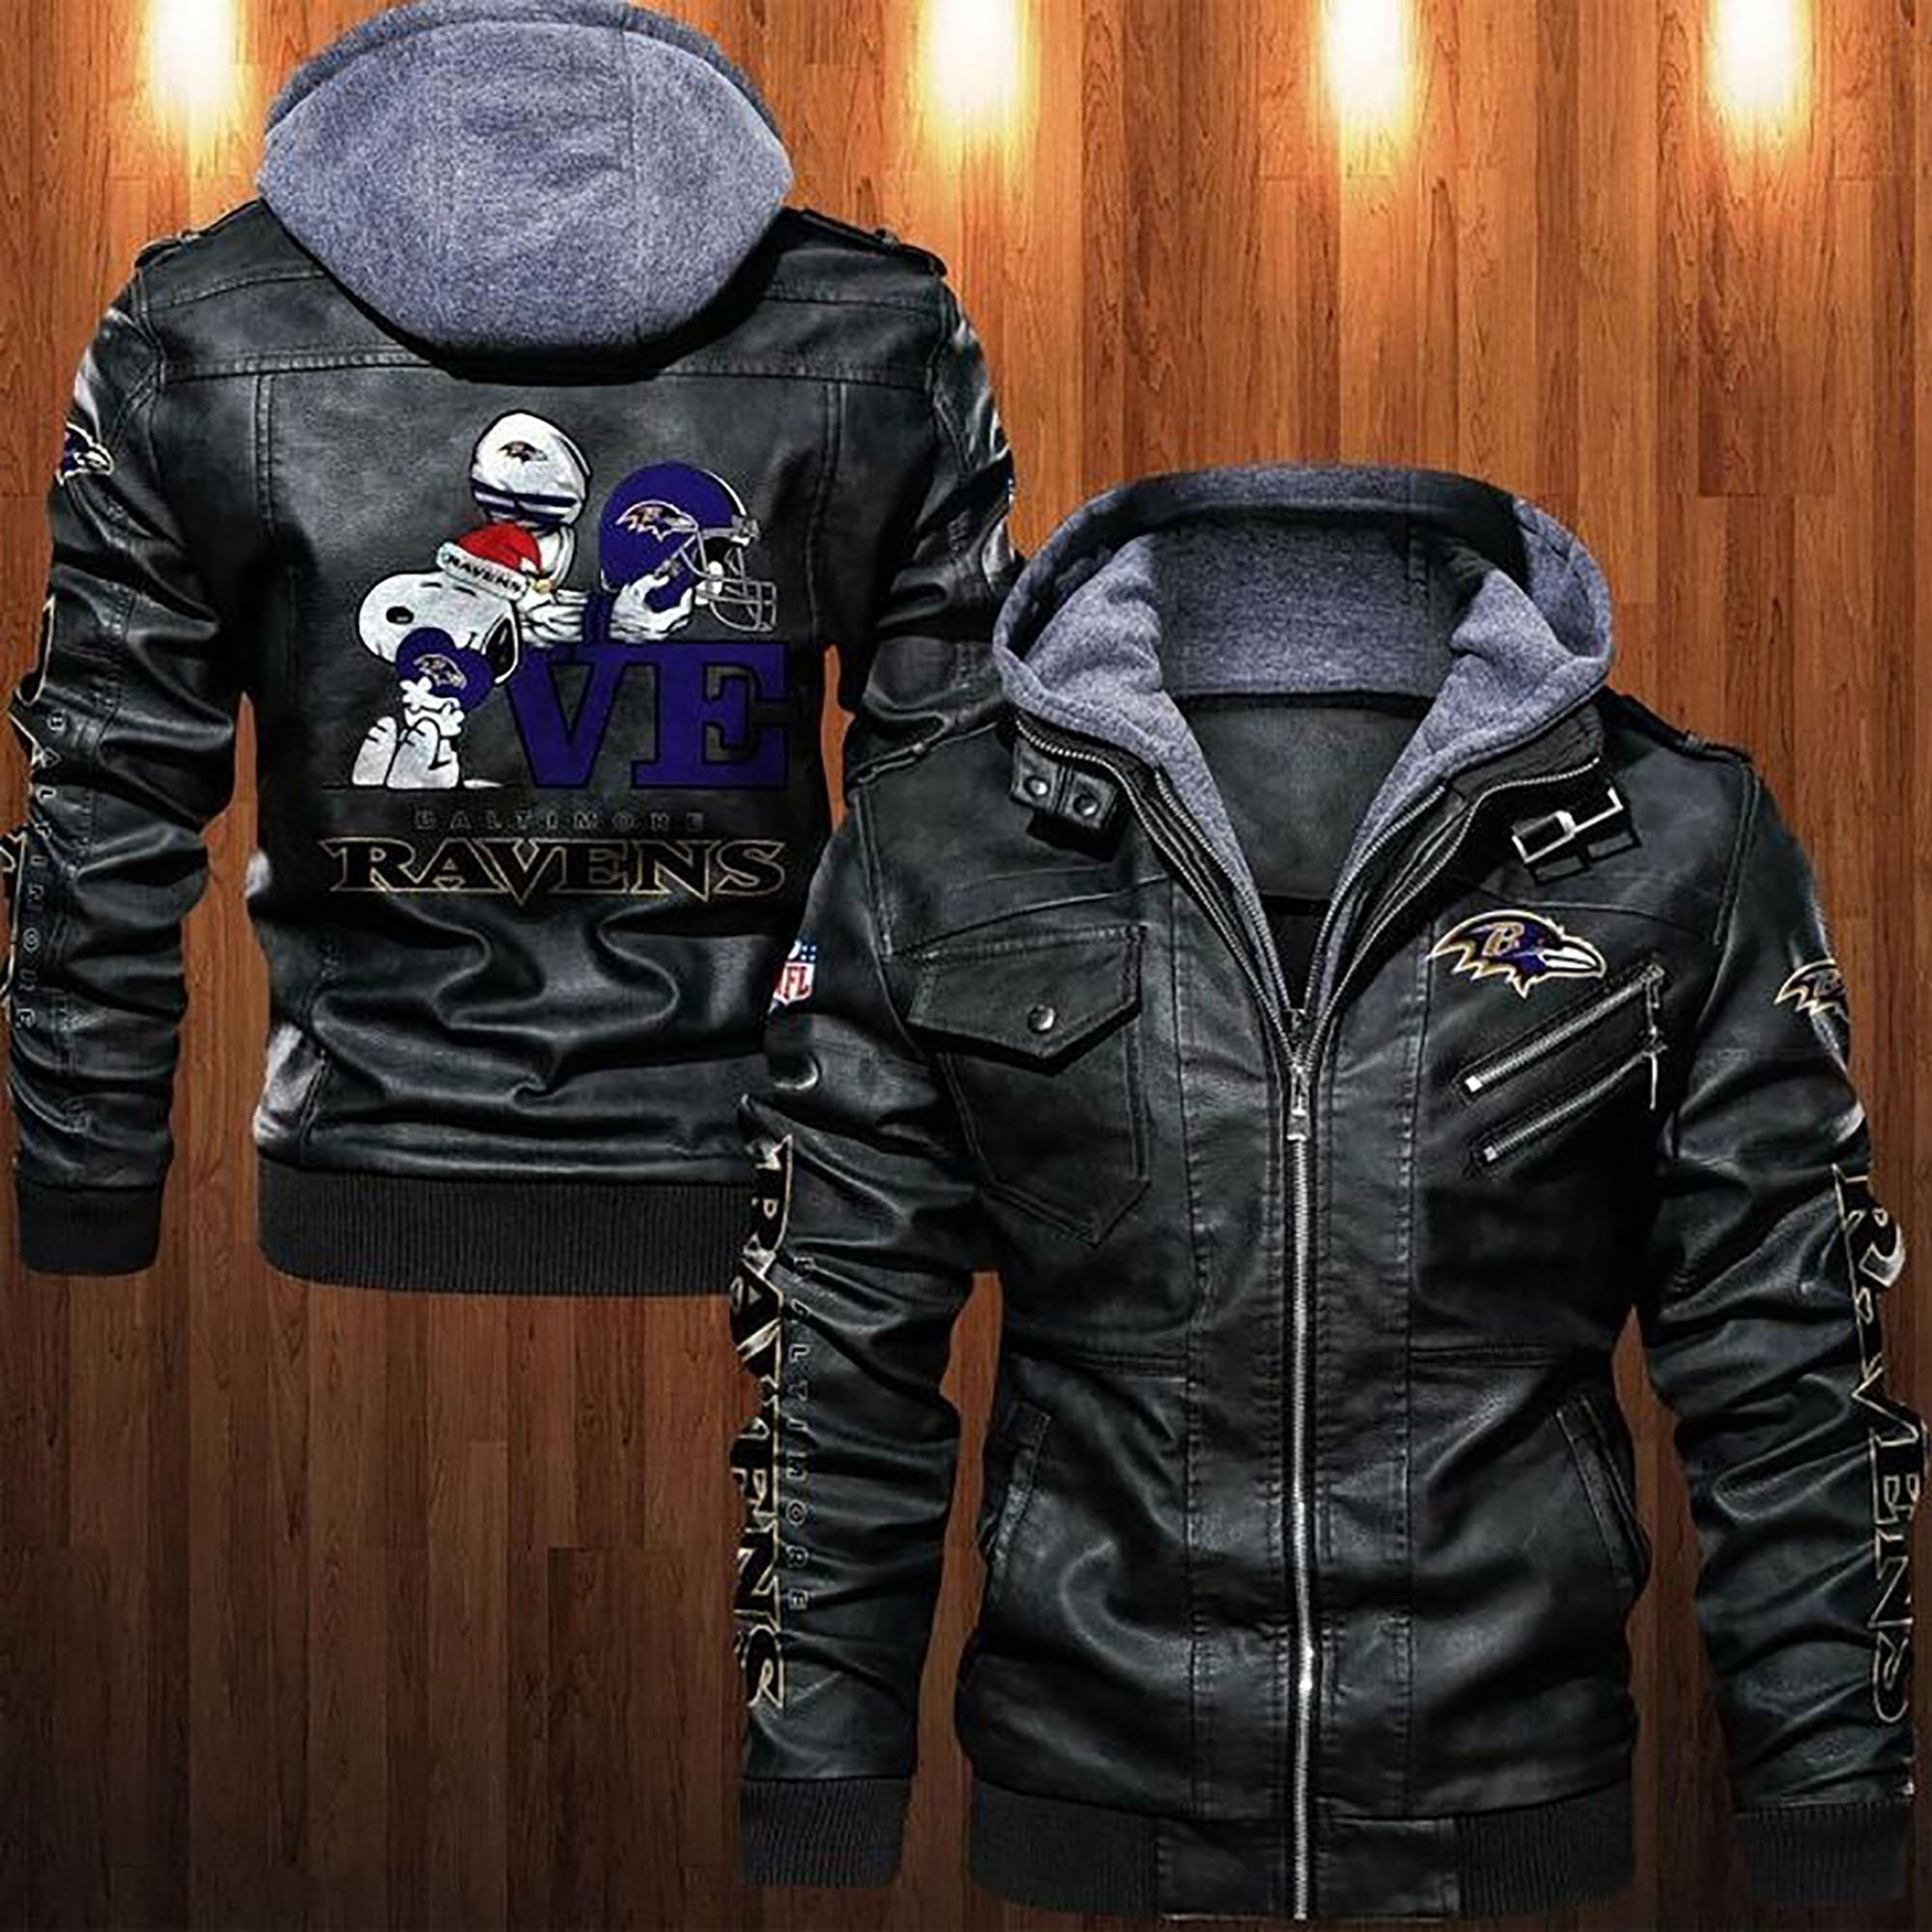 These Amazing Leather Jacket will add to the appeal of your outfit 183